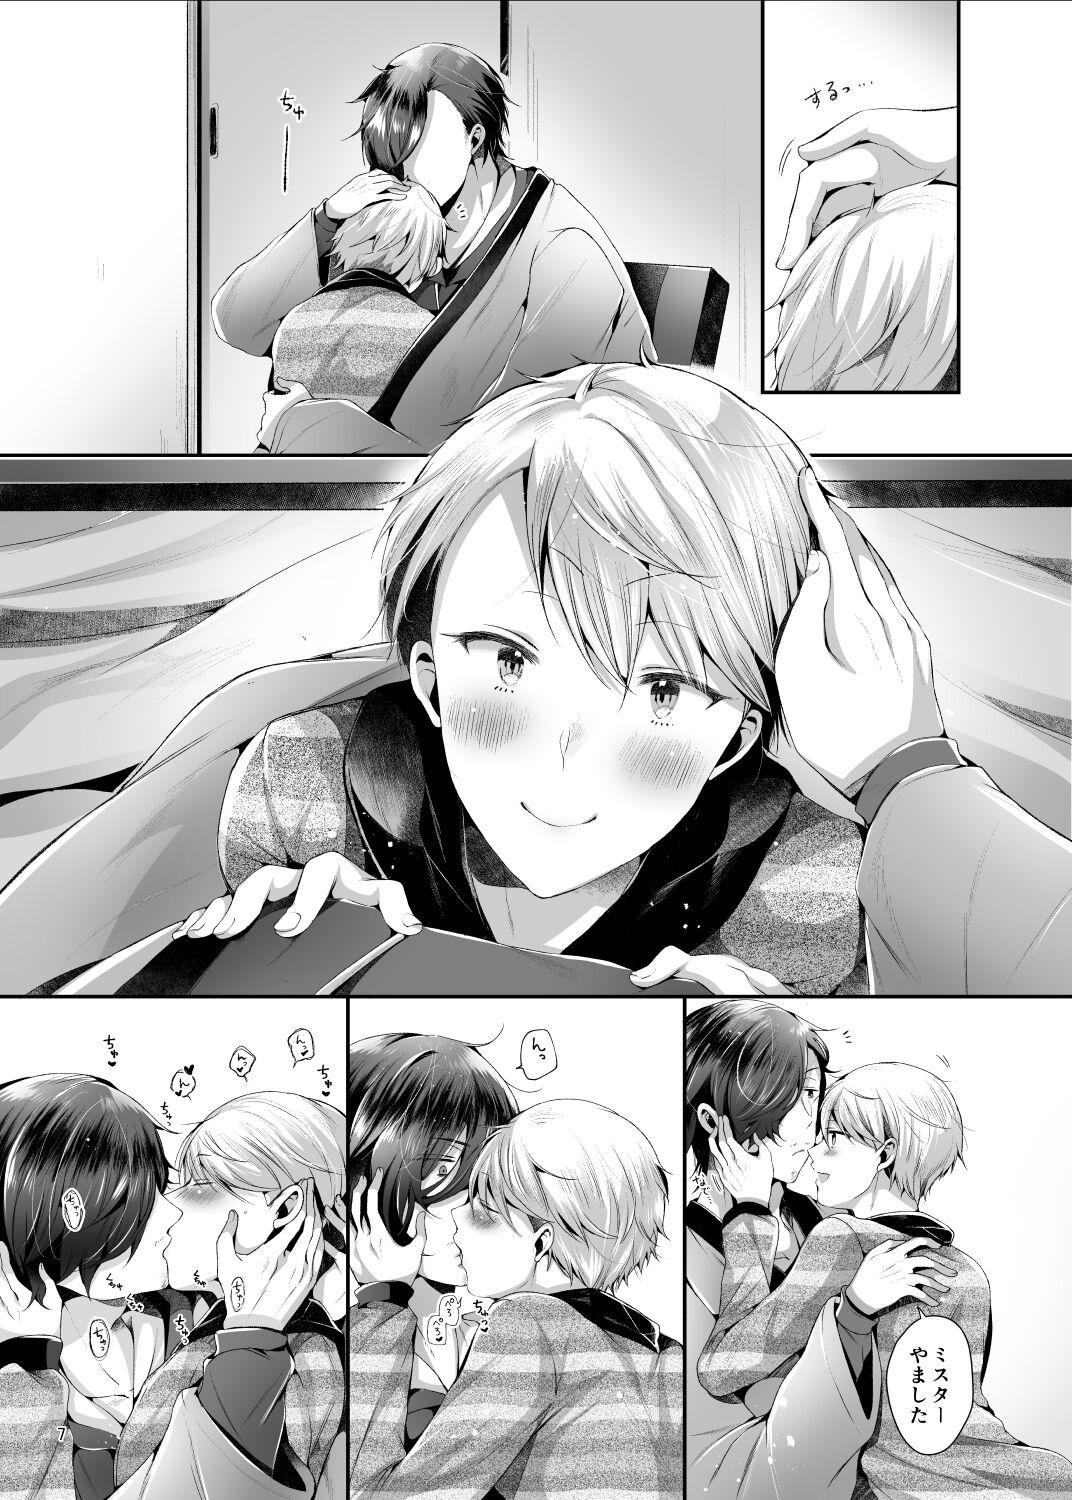 Behind Relax at home - The idolmaster sidem Sharing - Page 8